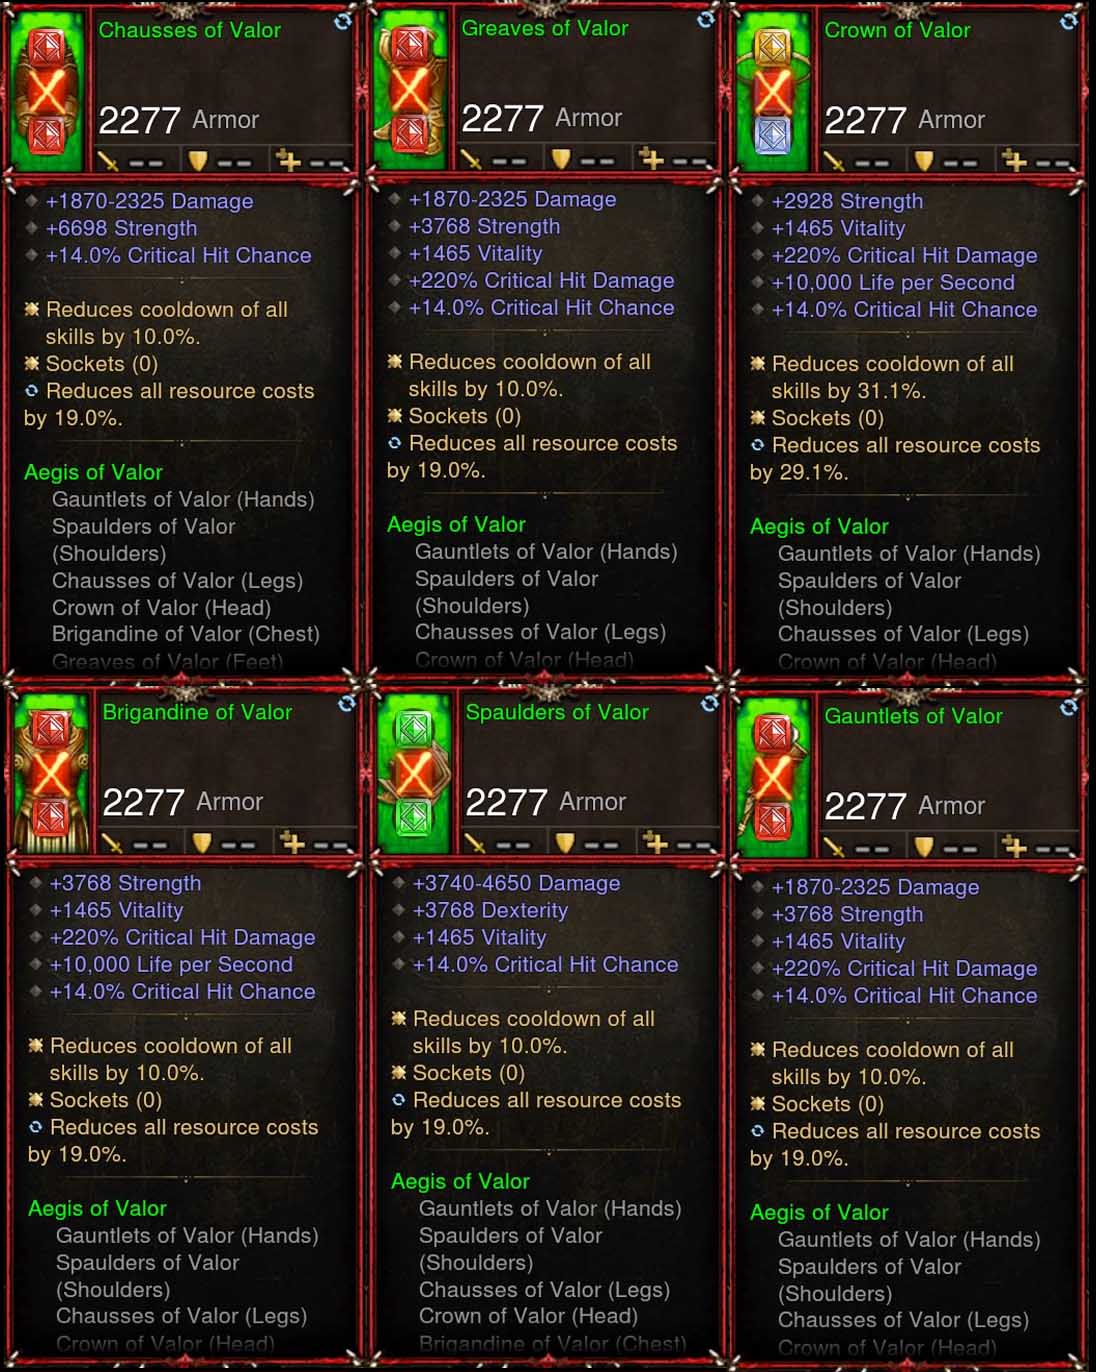 [Primal Ancient] 6x Piece Patch 2.6.7 Valor Crusader Set Diablo 3 Mods ROS Seasonal and Non Seasonal Save Mod - Modded Items and Gear - Hacks - Cheats - Trainers for Playstation 4 - Playstation 5 - Nintendo Switch - Xbox One